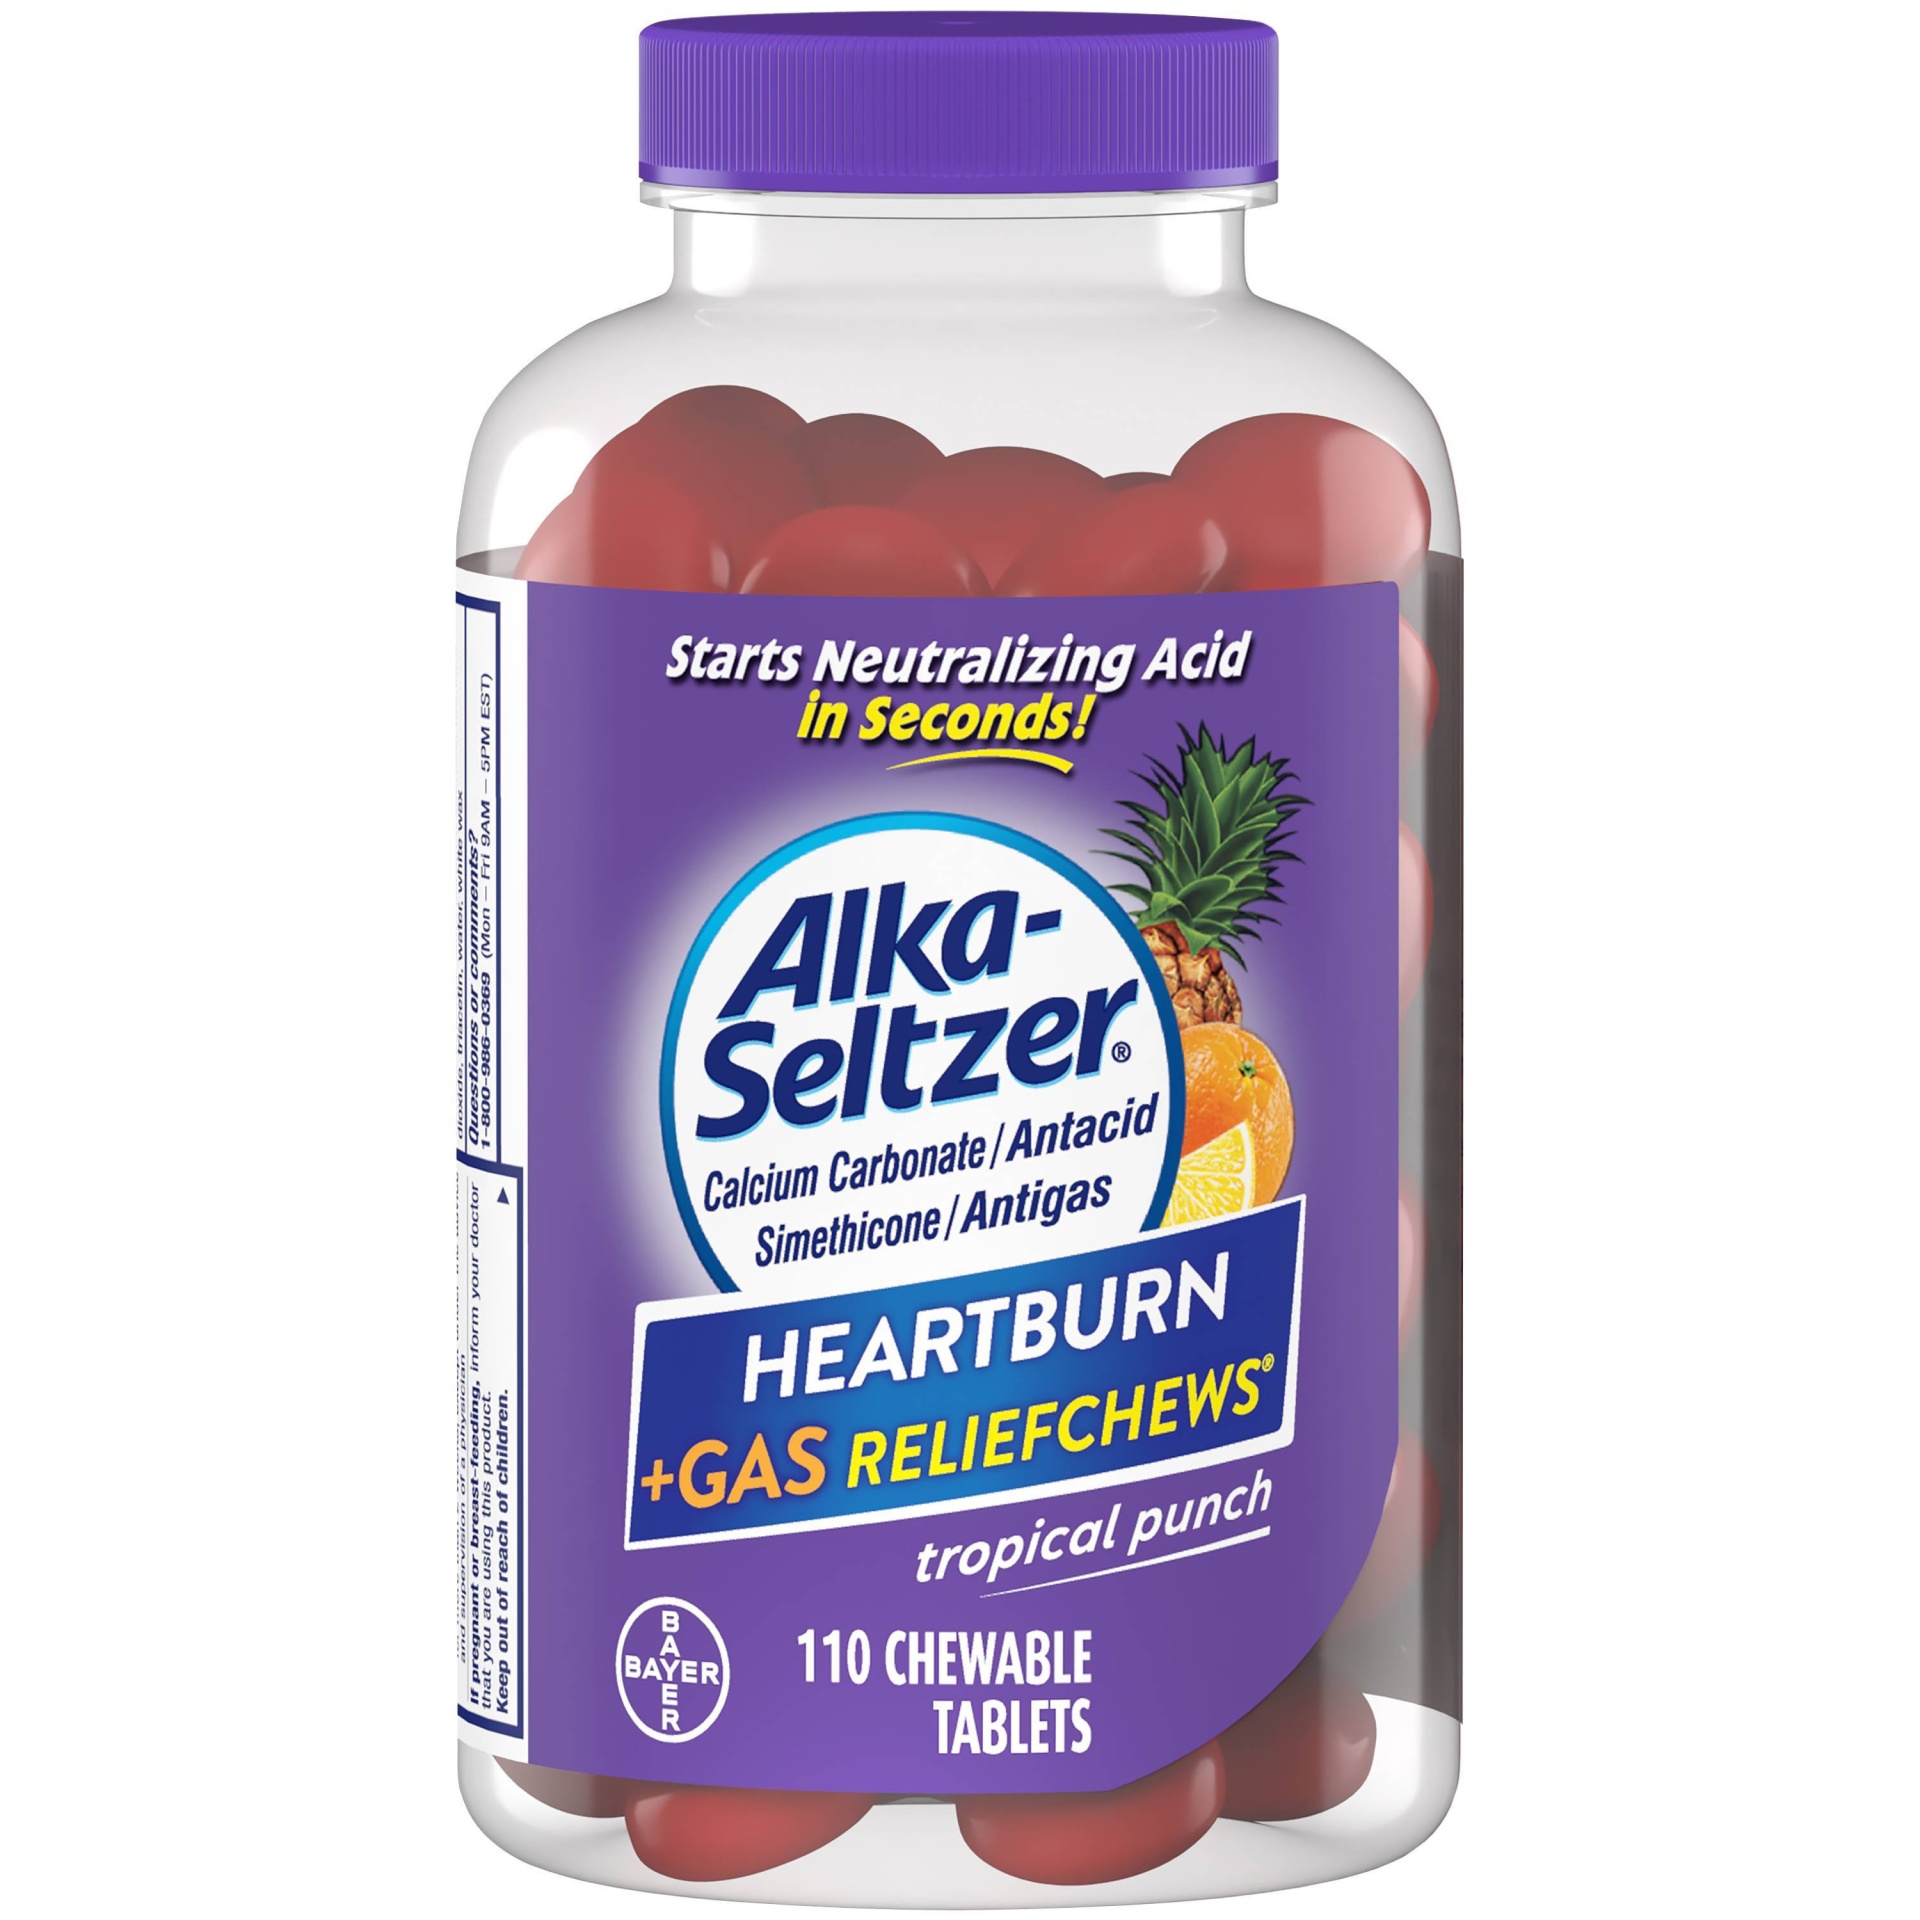 slide 1 of 1, Alka-Seltzer Heartburn + Gas Reliefchews Tropical Punch Chewable Tablets, 110 ct